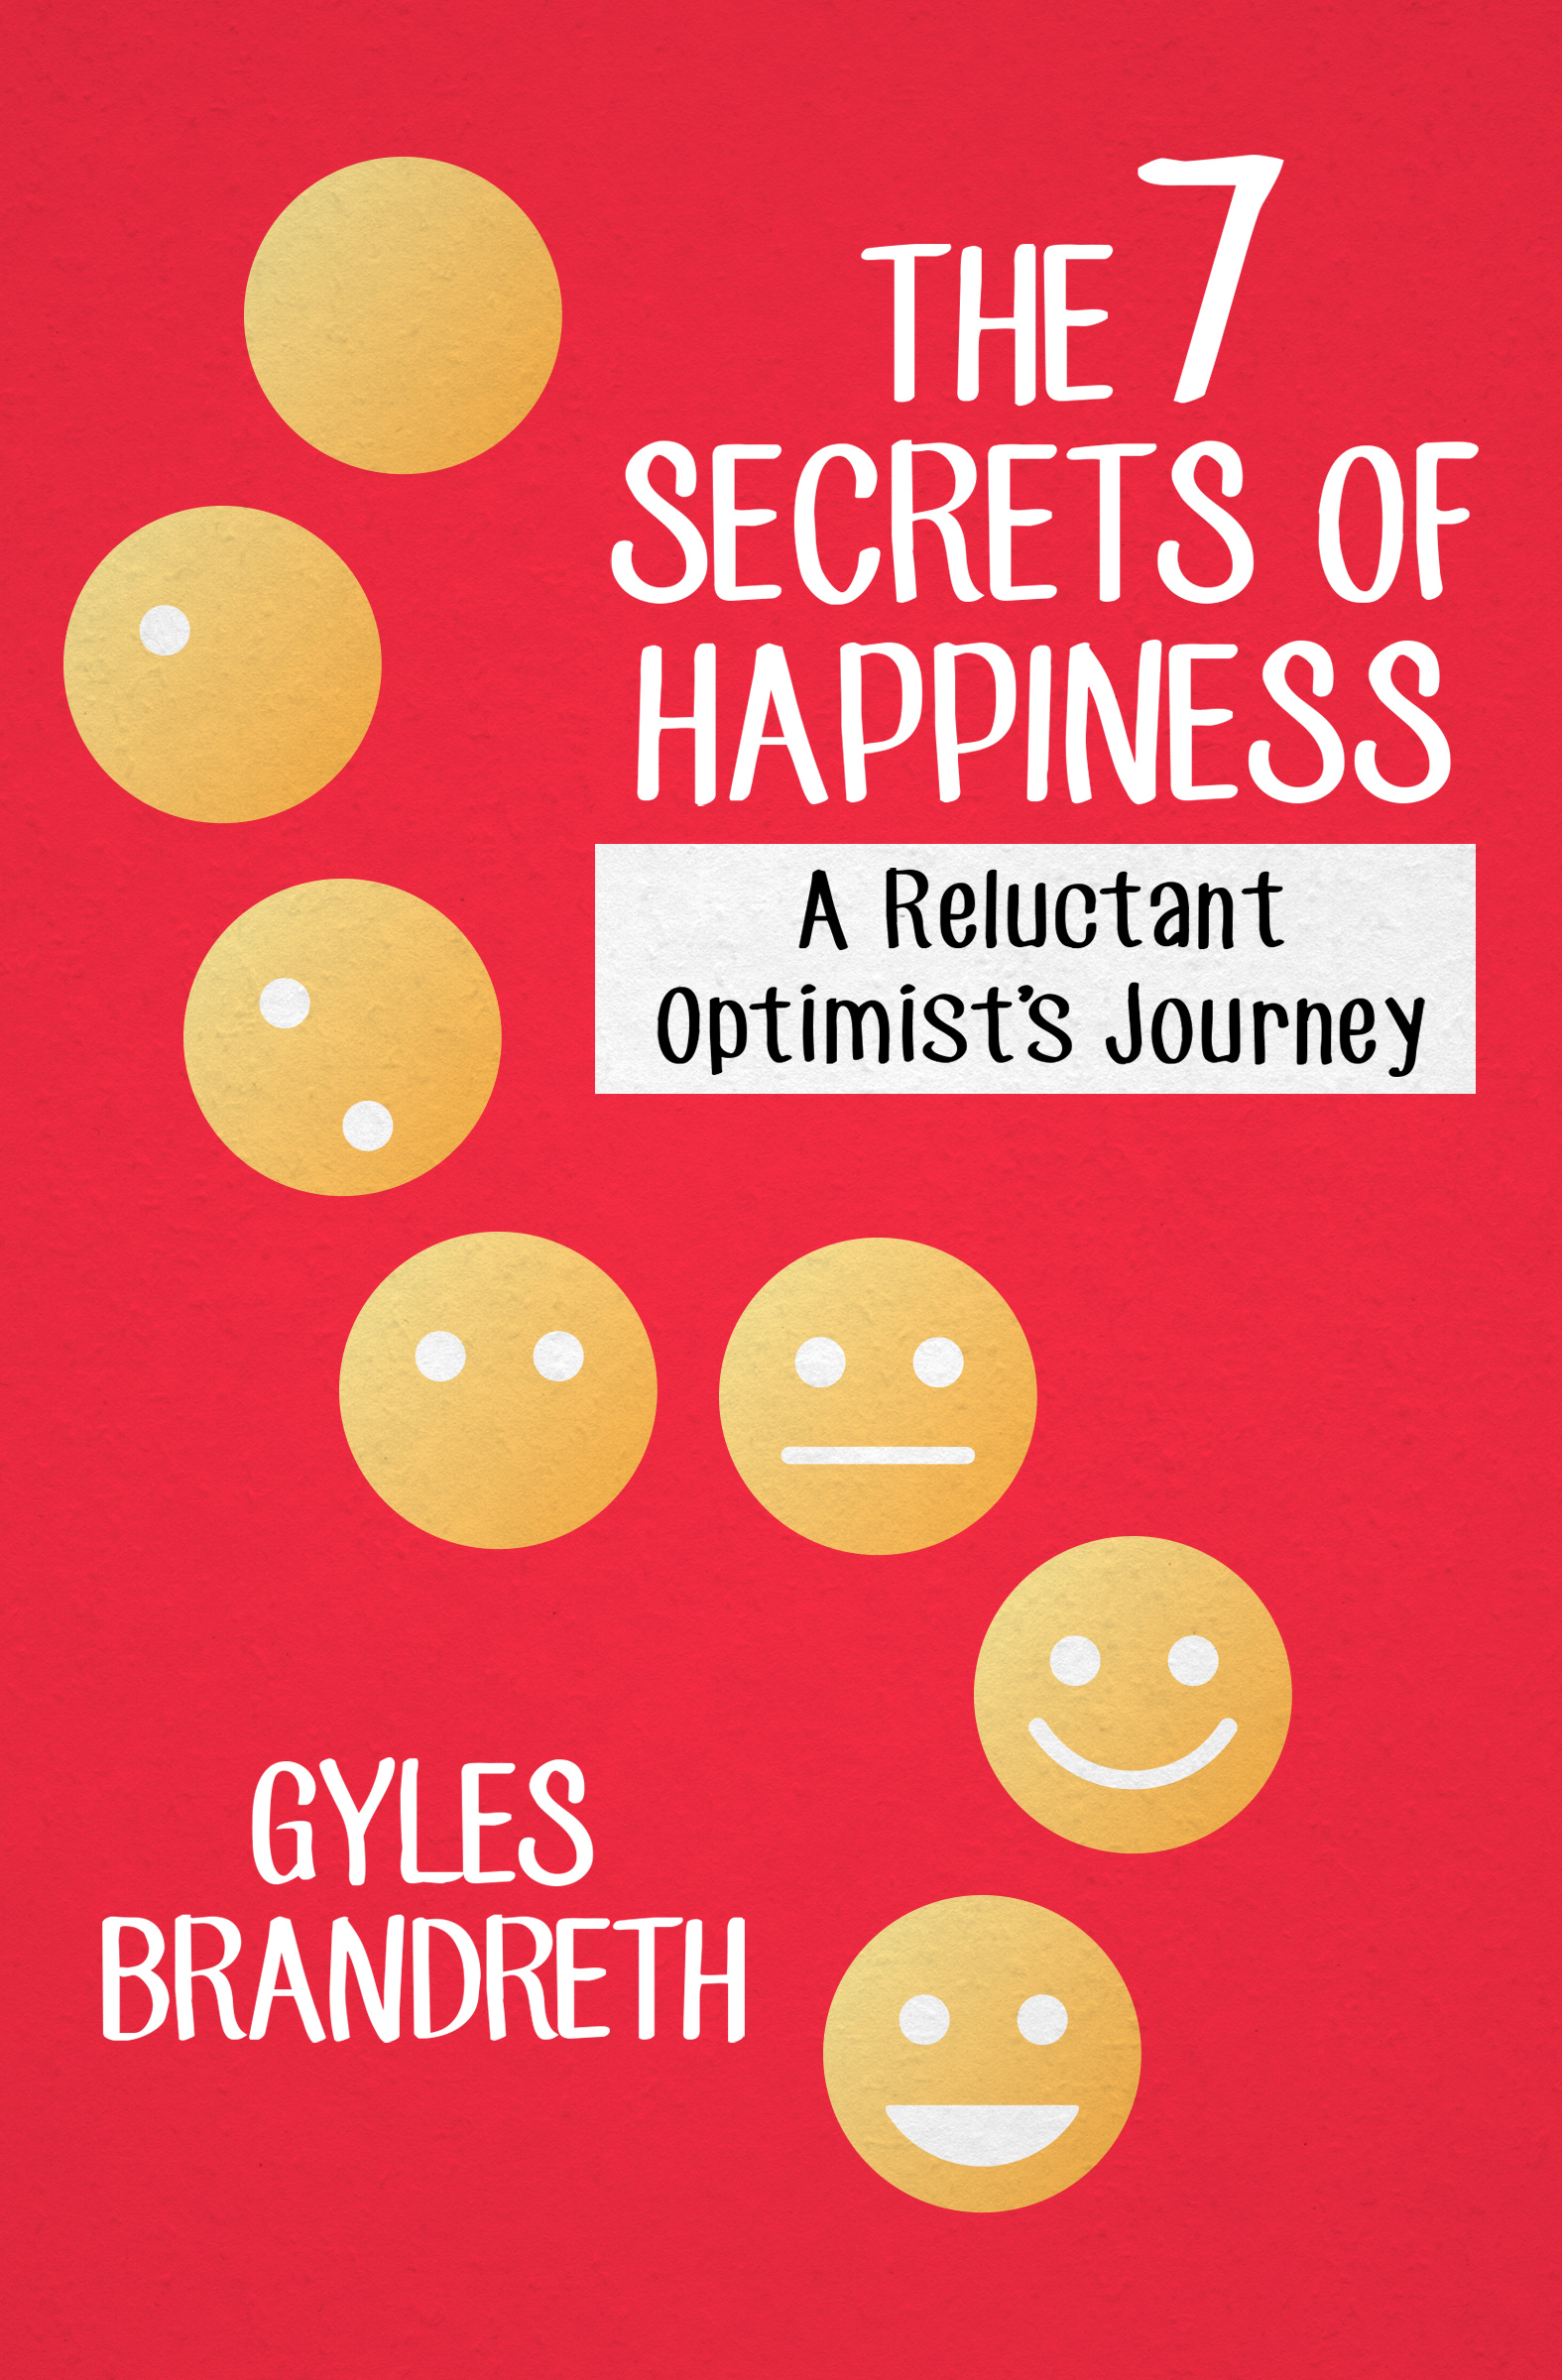 The 7 Secrets of Happiness A Reluctant Optimists Journey Gyles Brandreth - photo 3